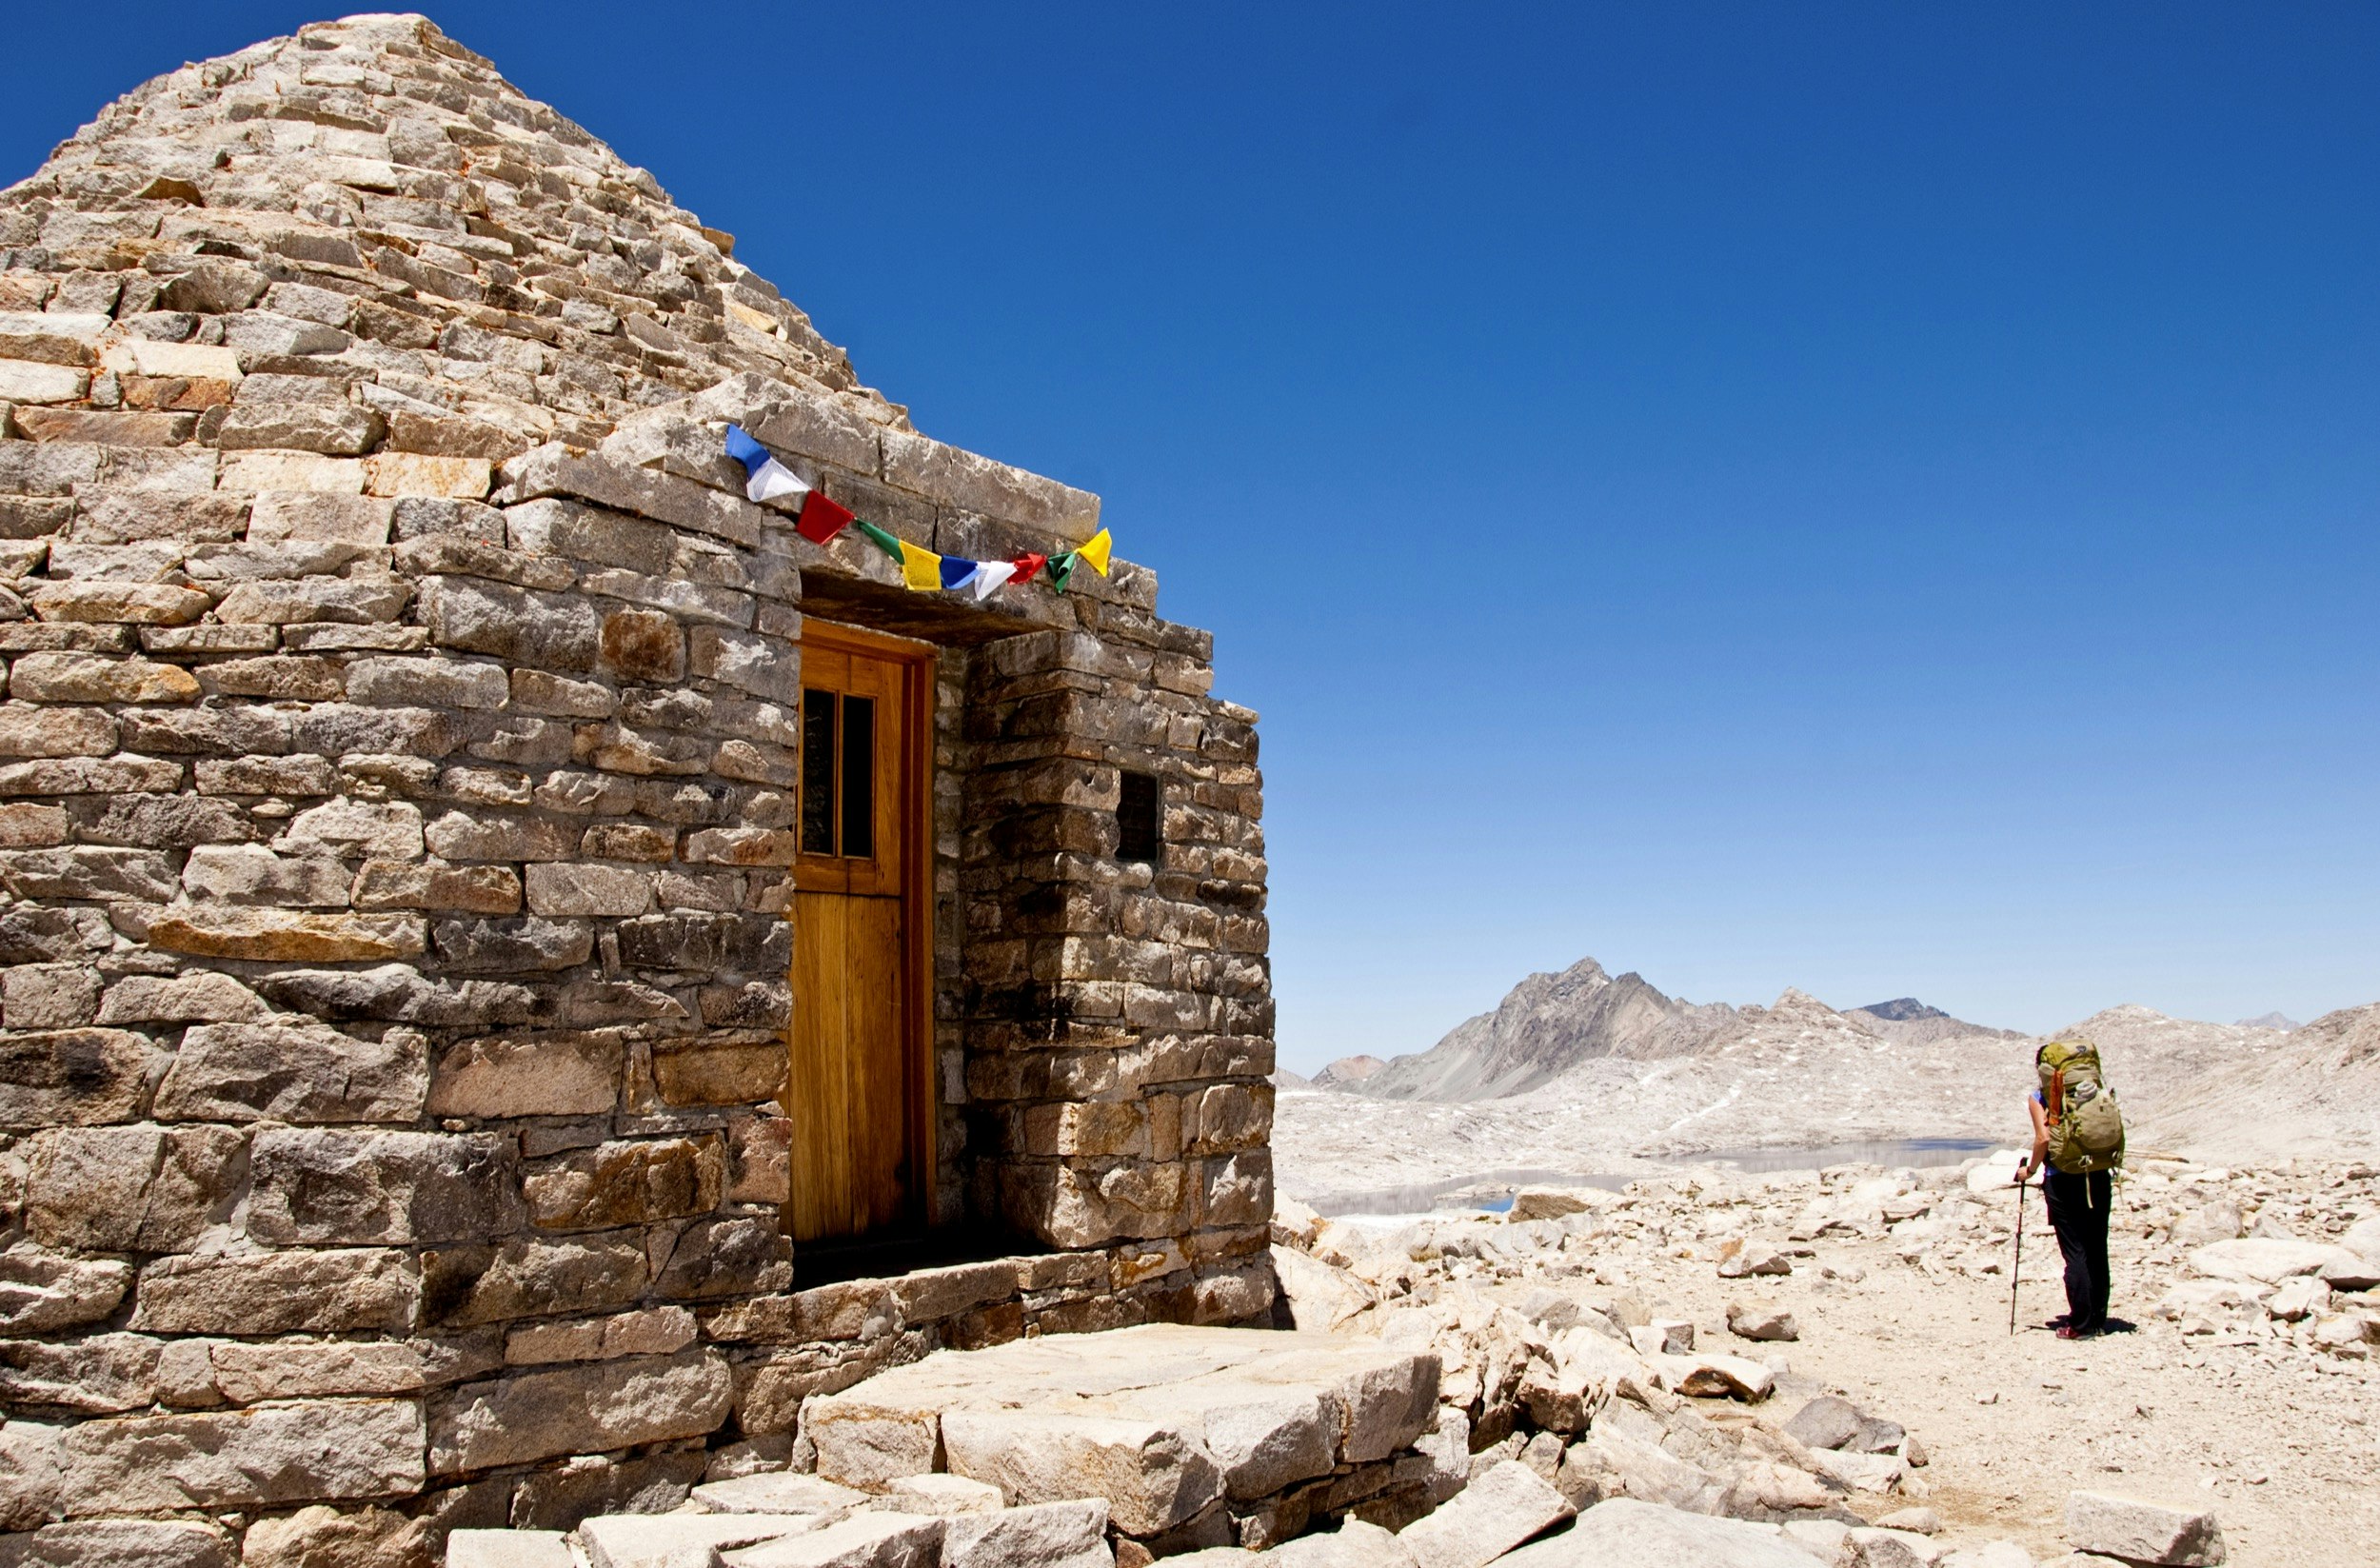 A woman stands next to small rustic stone shelter with colored flags over the door on the John Muir Trail in the Sierra Nevada mountain range